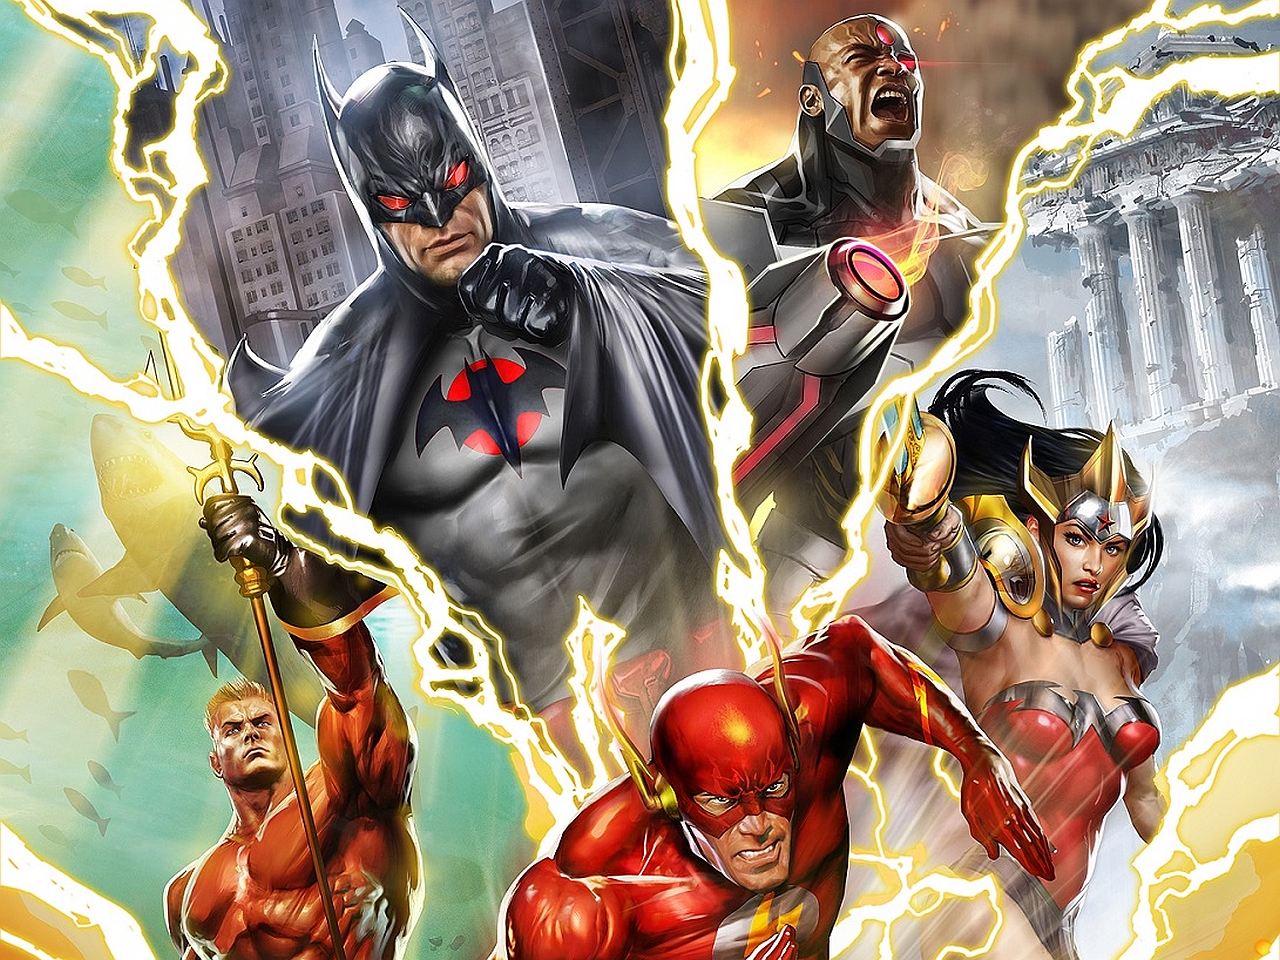 Justice League: The Flashpoint Paradox #4